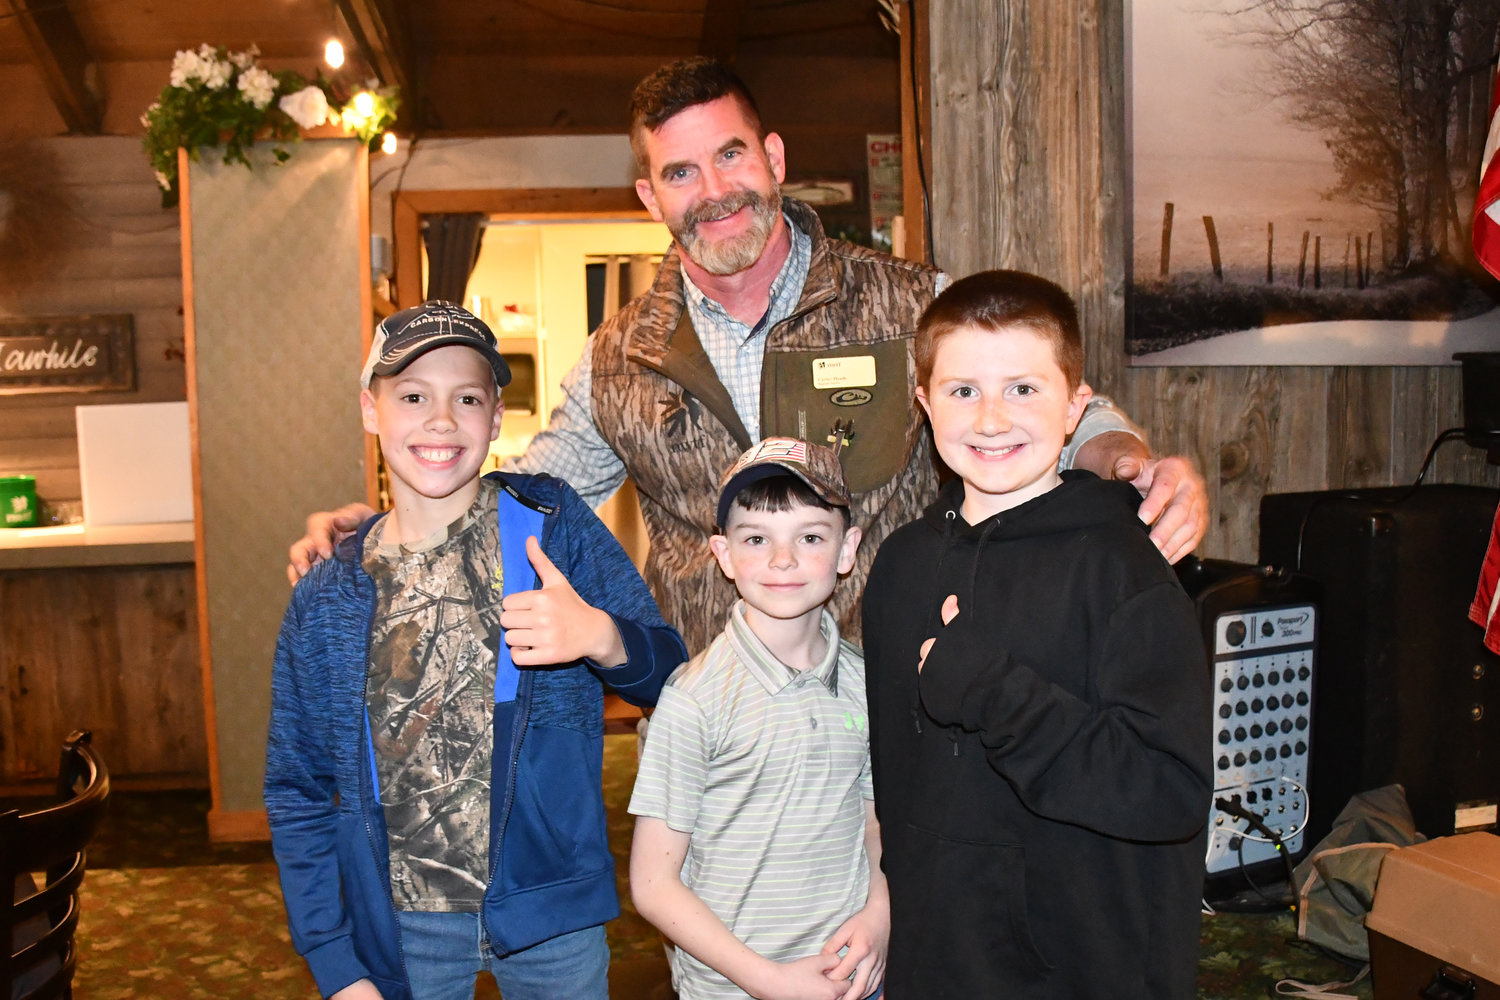 The Sullivan County Long Beards chapter of the National Wild Turkey Federation (NWTF) does a lot to promote youth, including a Youth Pheasant Hunt and several other contests. Here NWTF Northeastern Regional Director Carter Heath thanks three young sportsmen for attending Sunday’s event. They are, from the left, Jack Darder of Grahamsville, Tanner Houghtaling of Hortonville and Hudson Brigham of Binghamton.